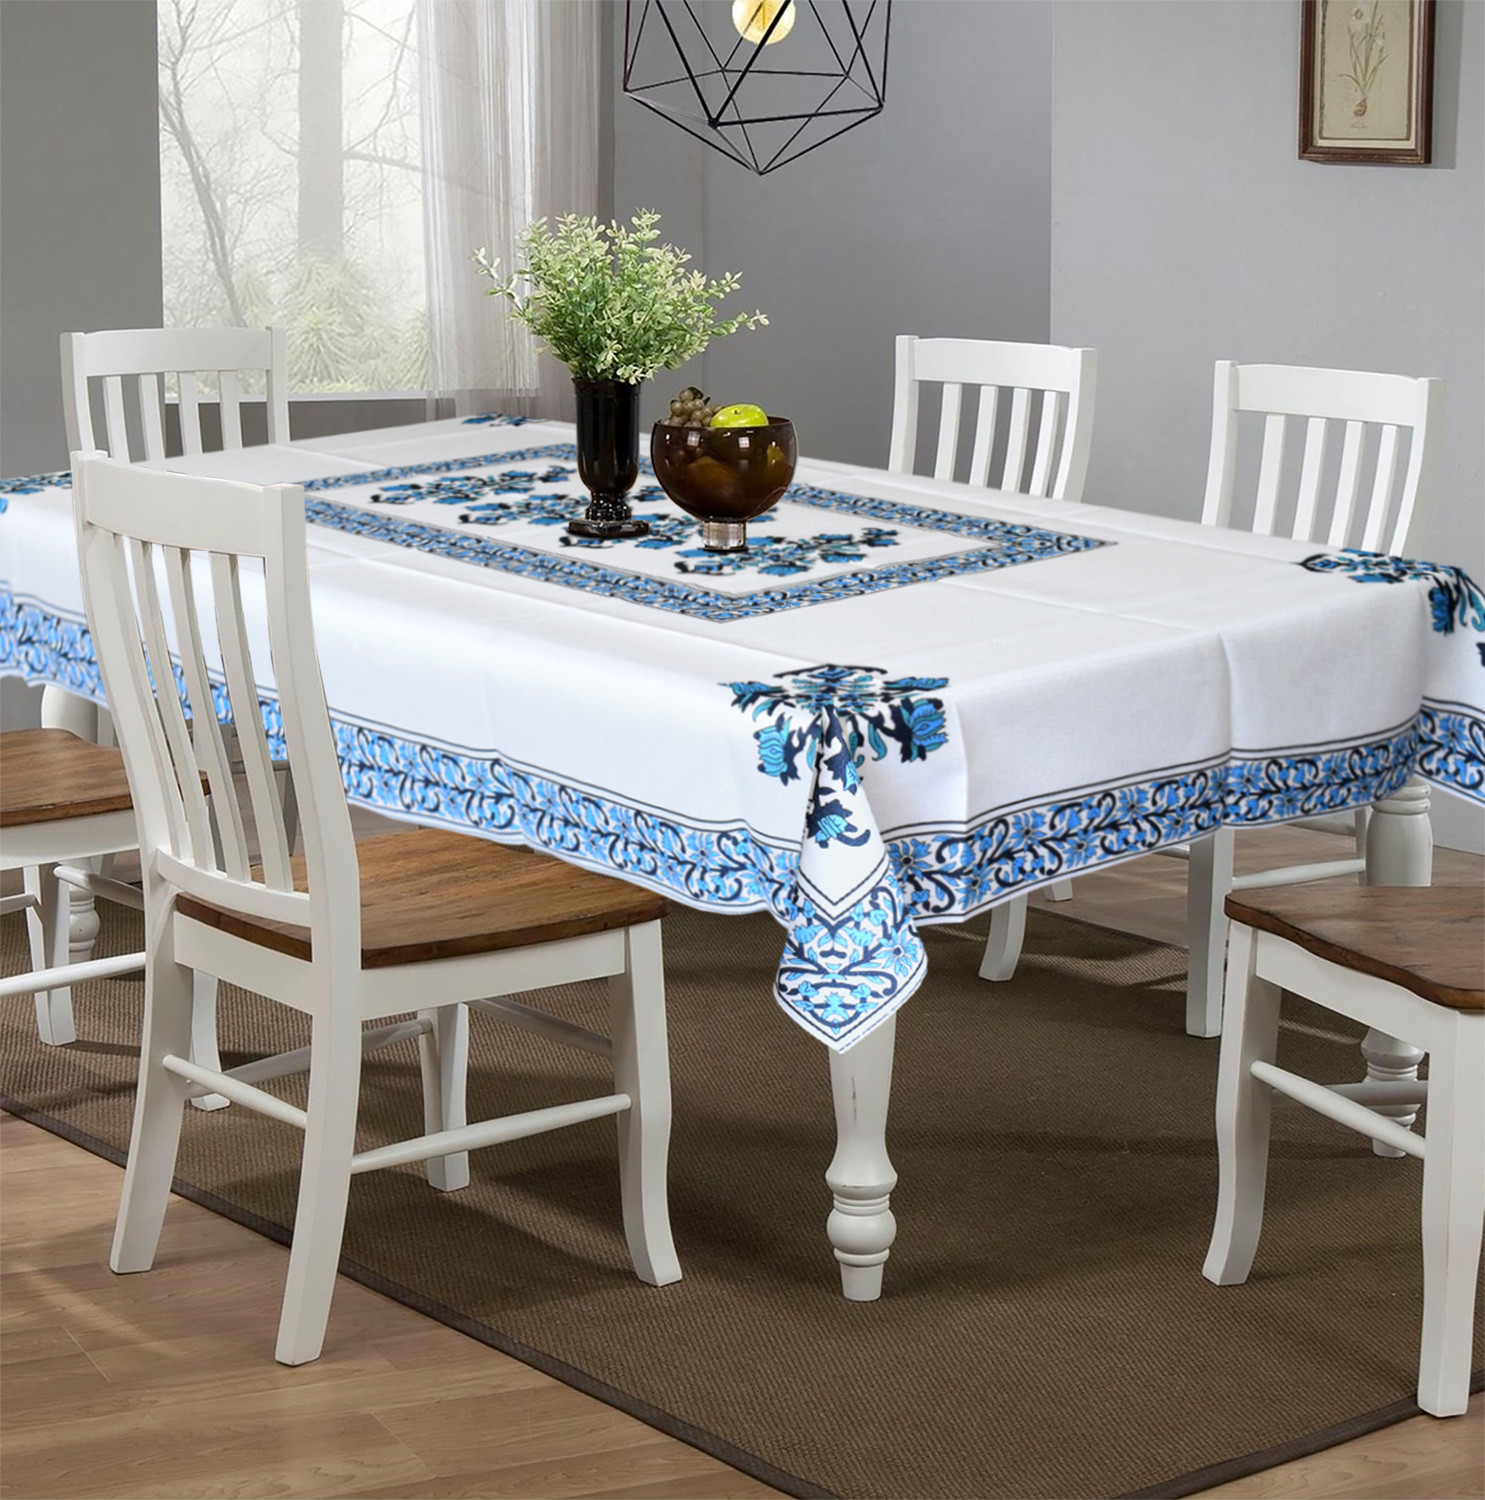 Kuber Industries Floral Print Polyester Dining Table Cover/Table Cloth For Home Decorative Luxurious 6 Seater, 60